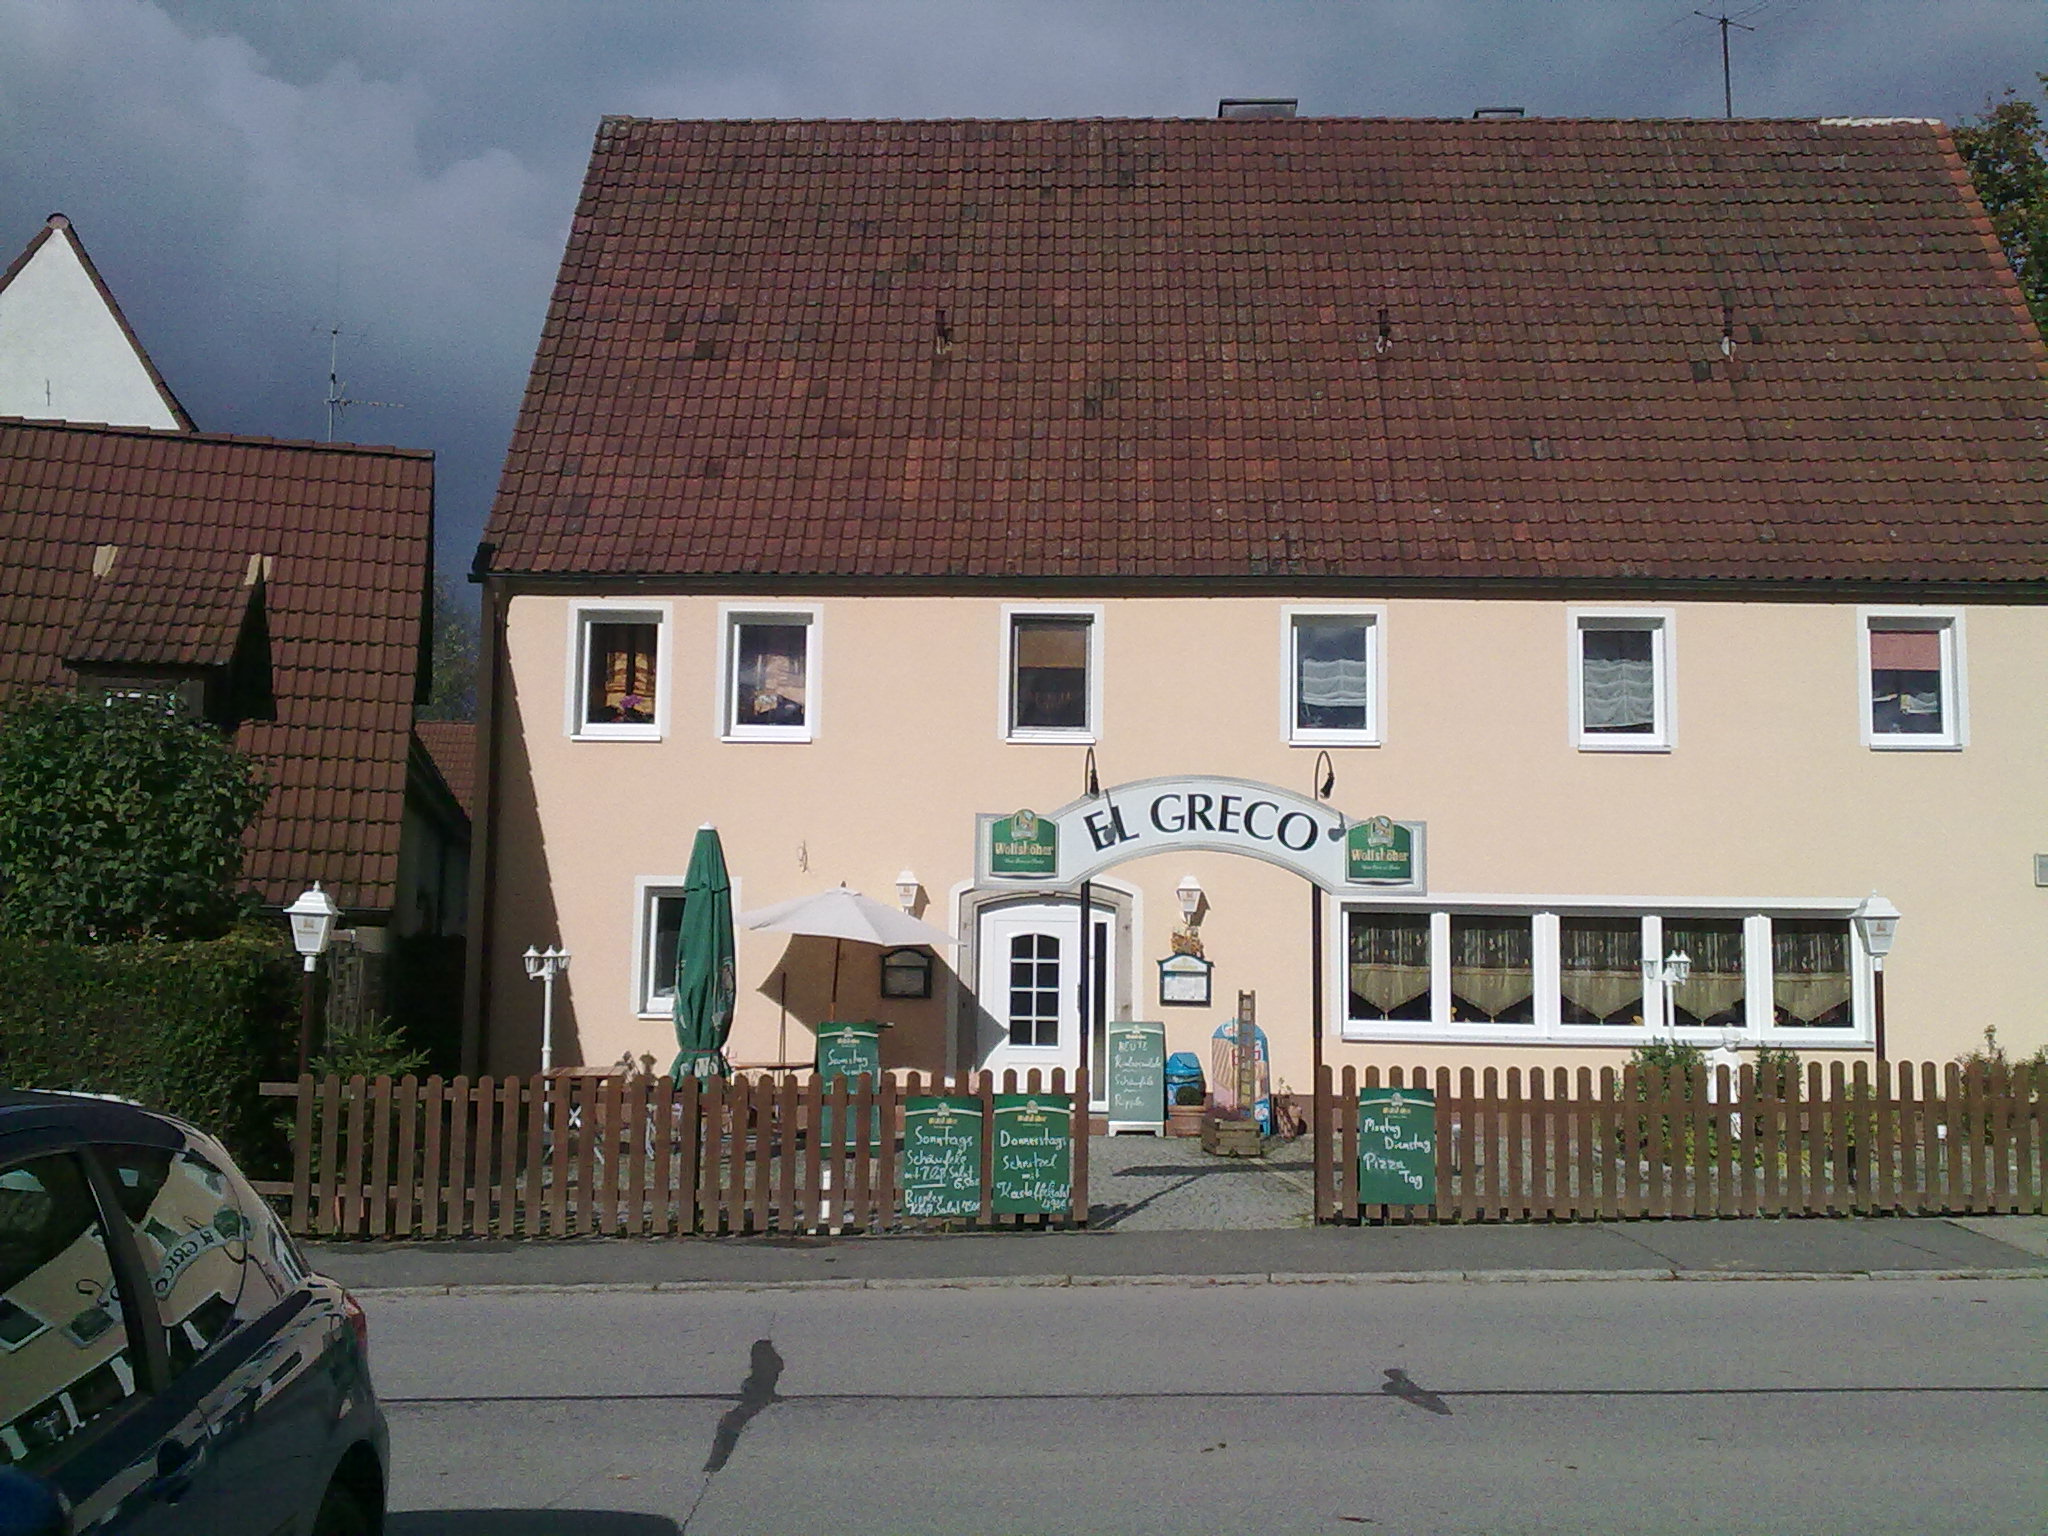 Taverne "El Greco" in
Henfenfeld